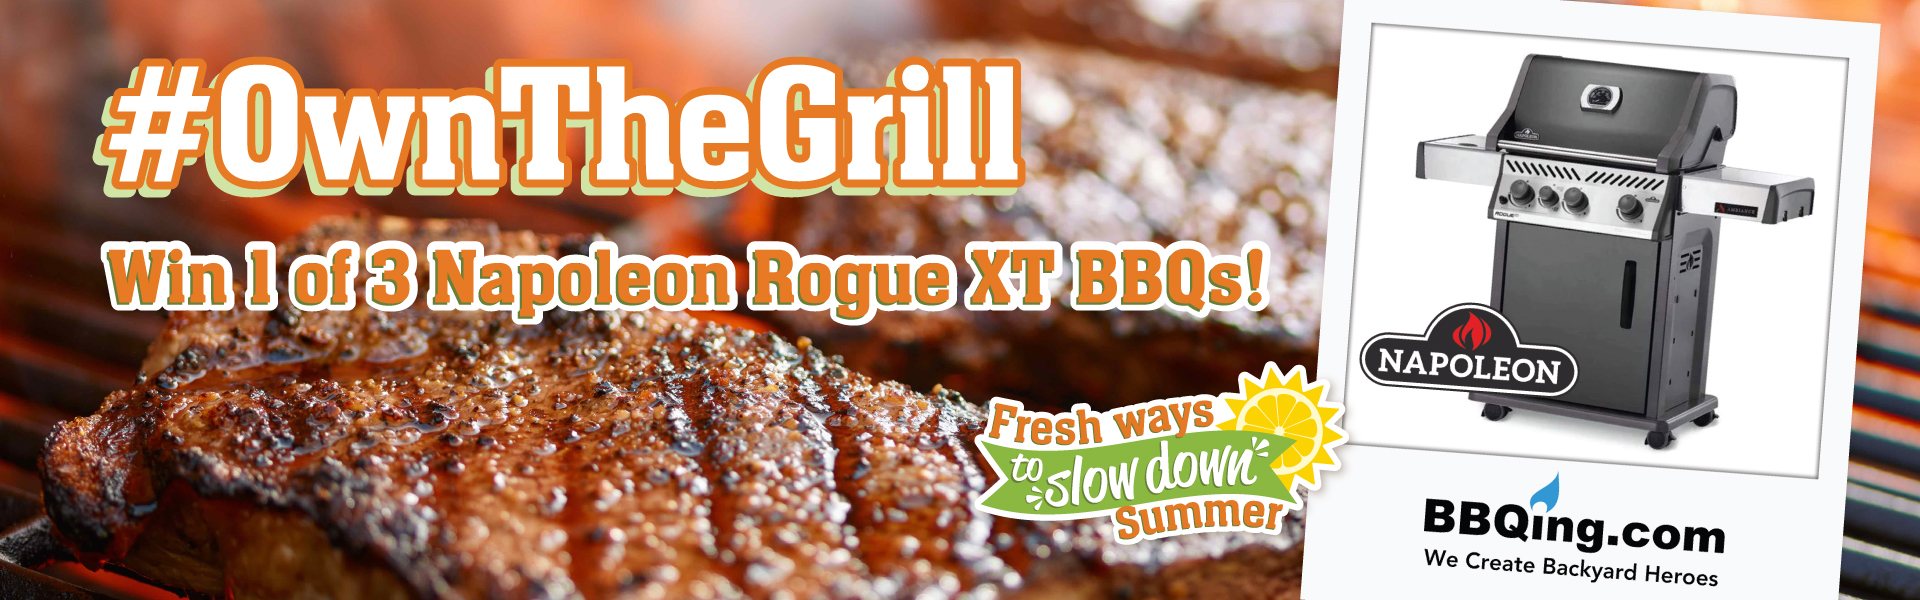 Own the Grill - Summer Contest. Win 1 of 3 Napoleon Rogue XT BBQs.